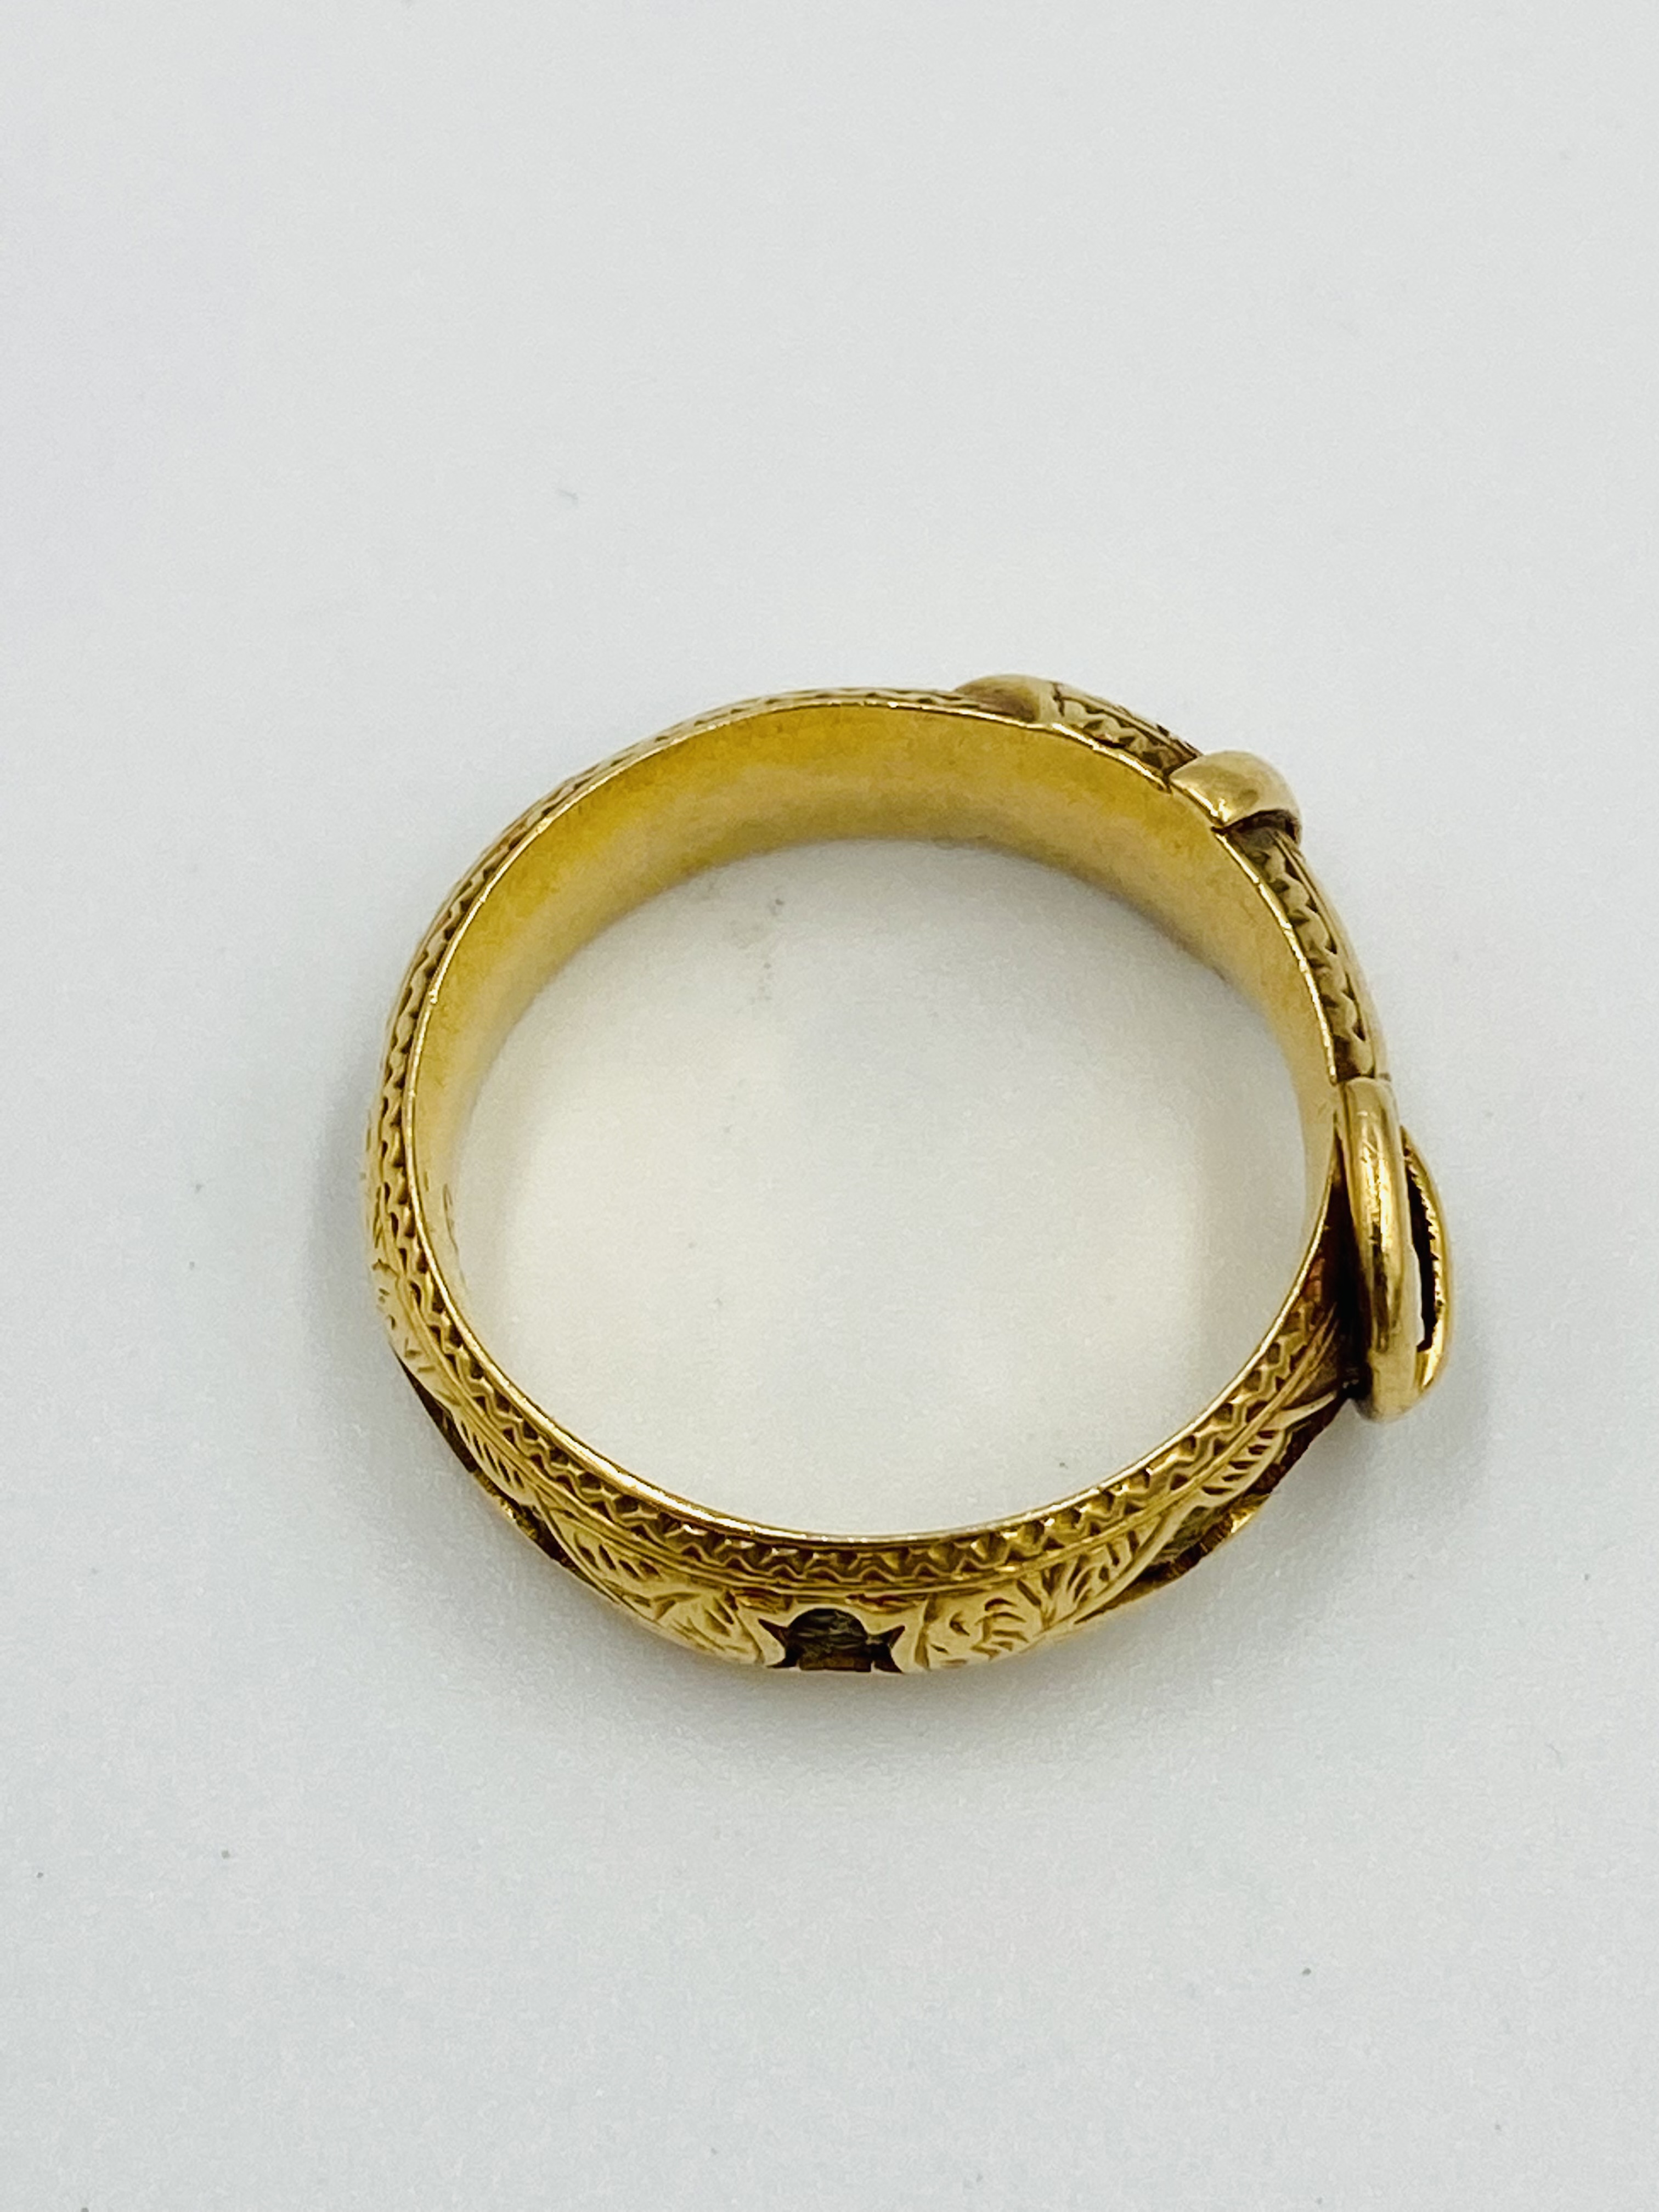 Victorian 18ct gold buckle ring - Image 4 of 4